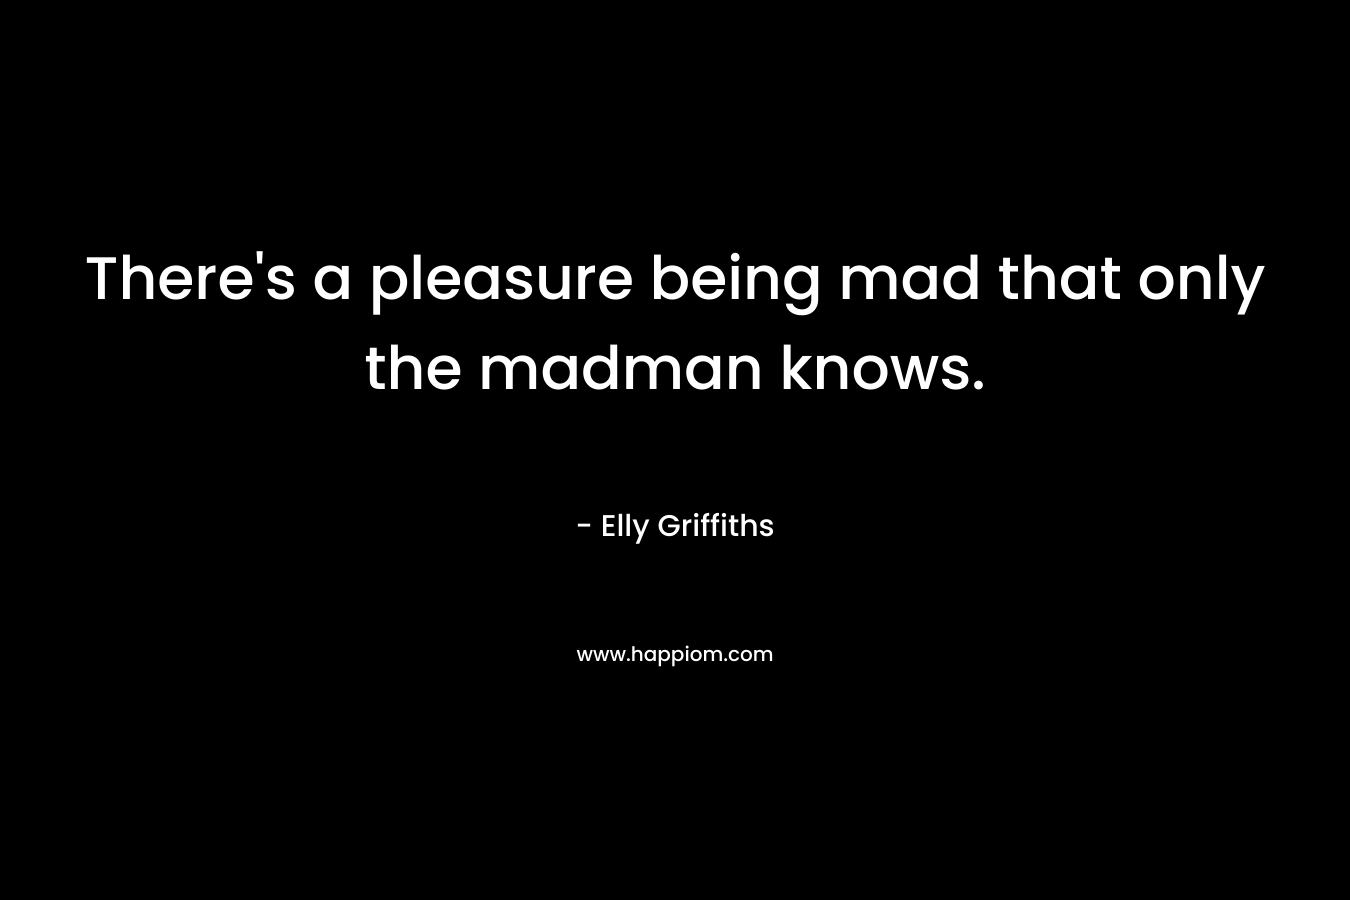 There’s a pleasure being mad that only the madman knows. – Elly Griffiths